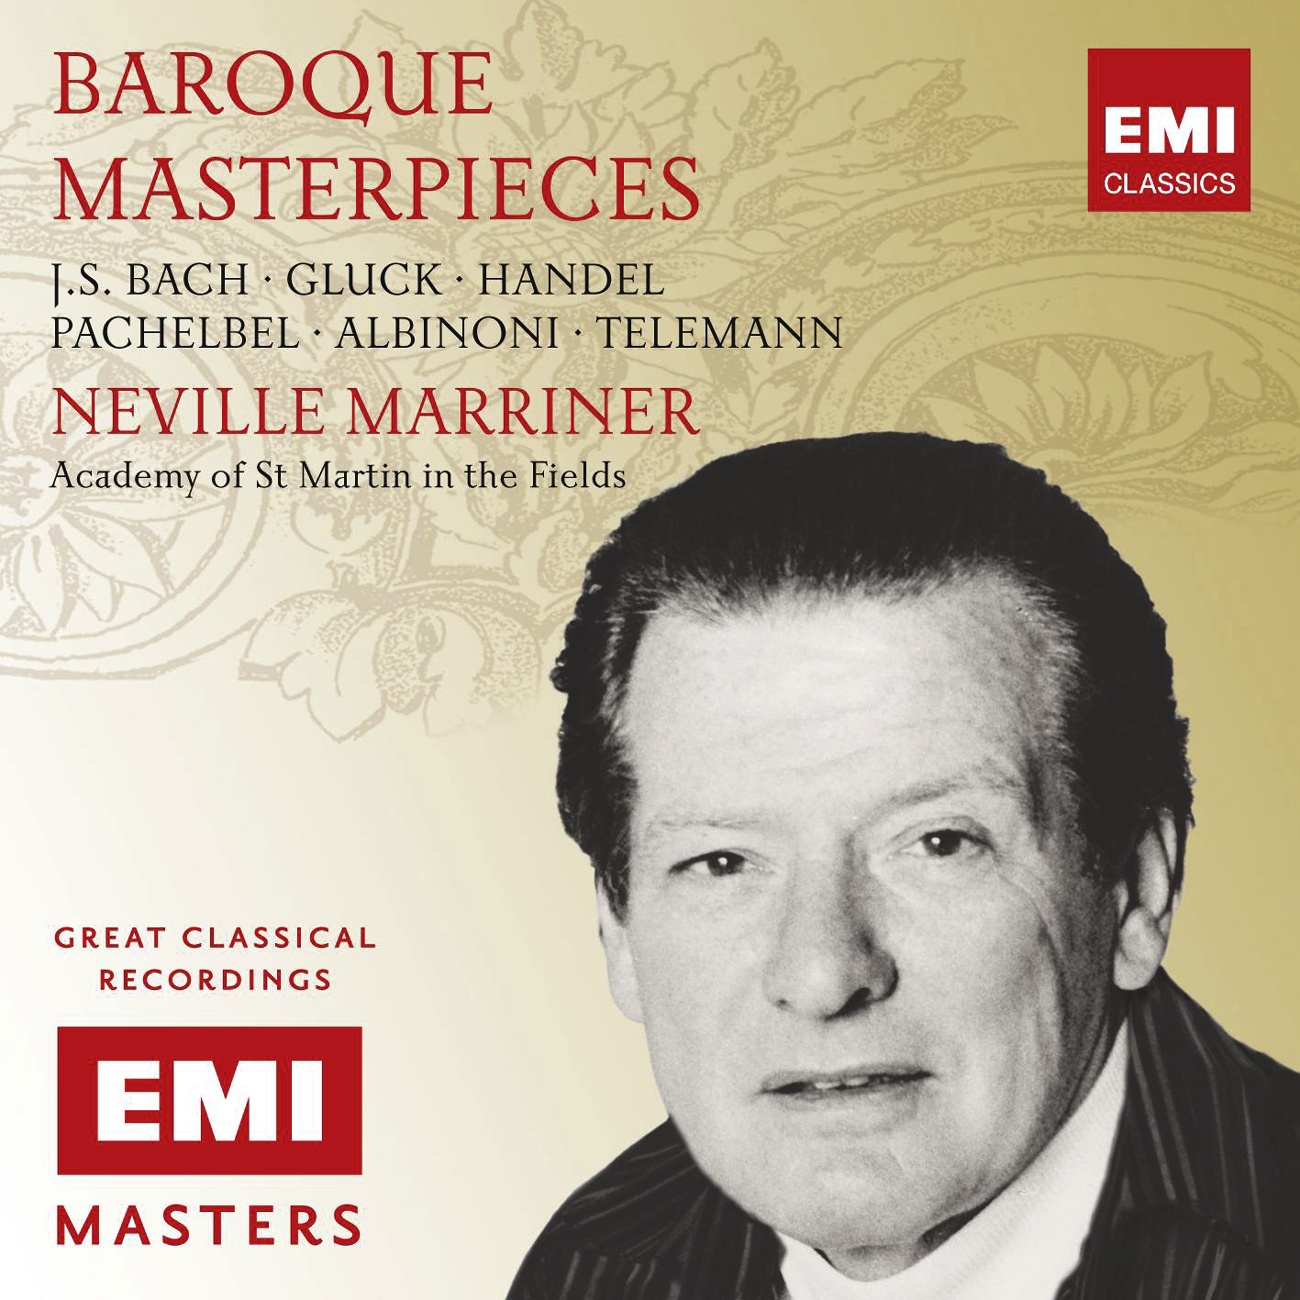 4 Orchestral Suites, BWV 1066-9, Suite No.3 in D Major, BWV 1068 (2 oboes, 3 trumpets, strings and timpani): Gigue